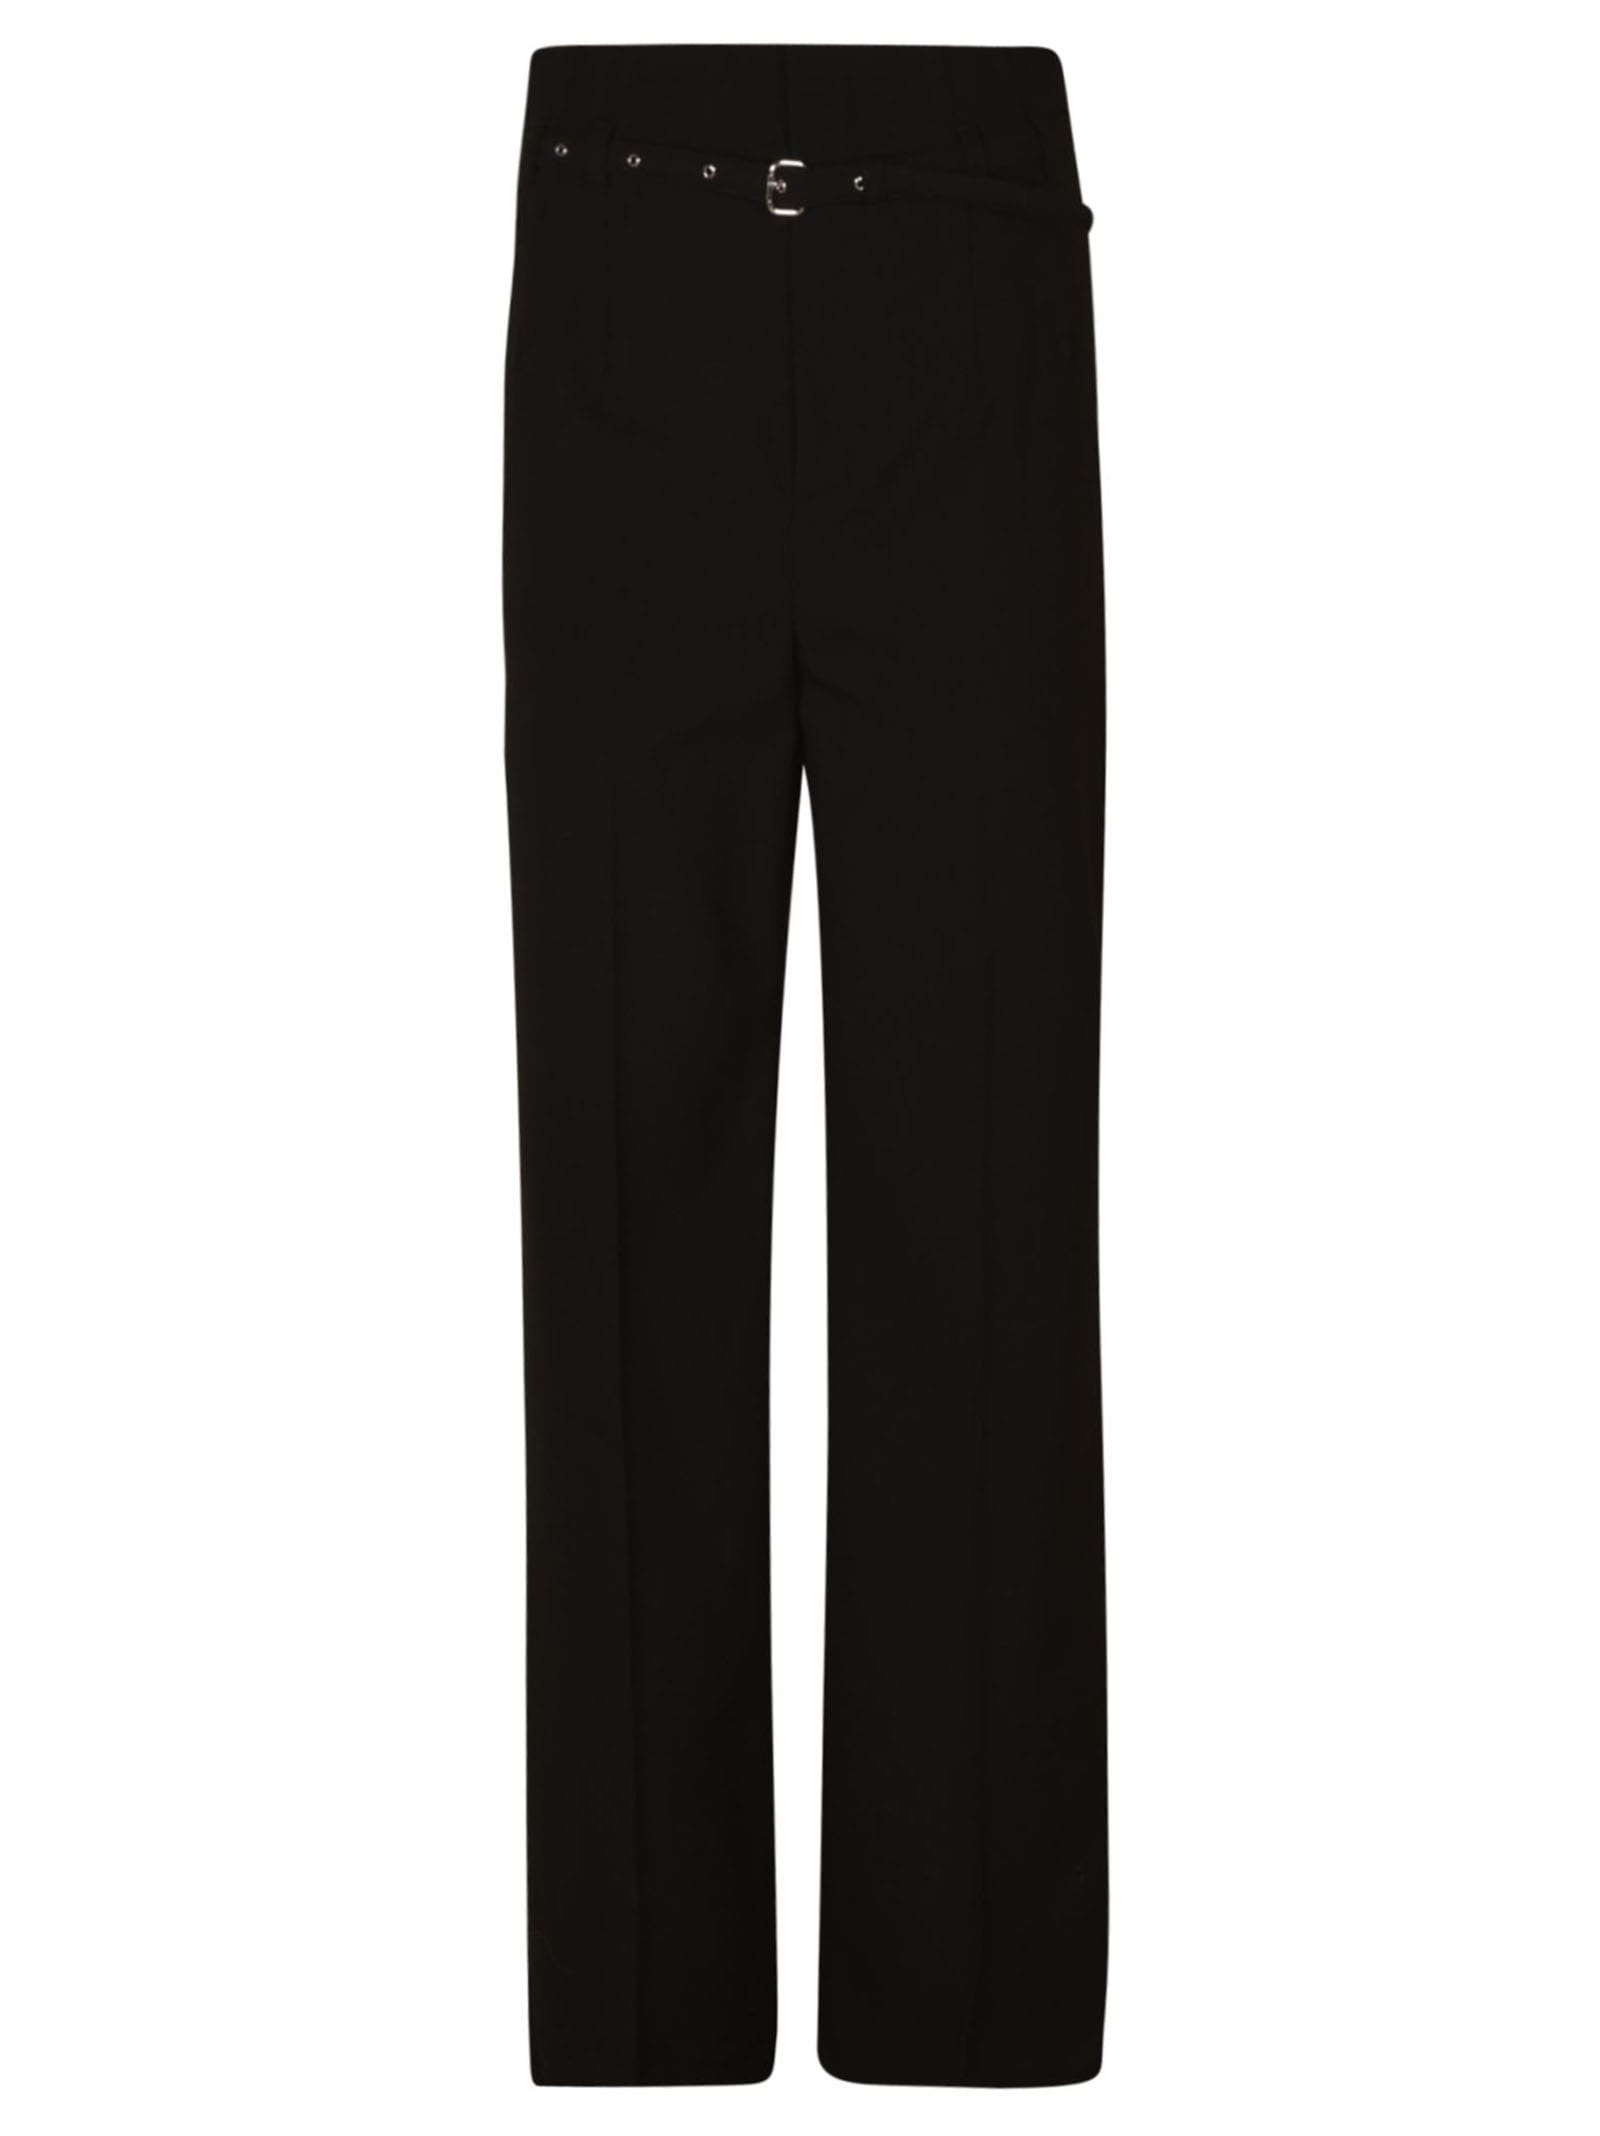 RED Valentino Straight Leg Plain Belted Trousers